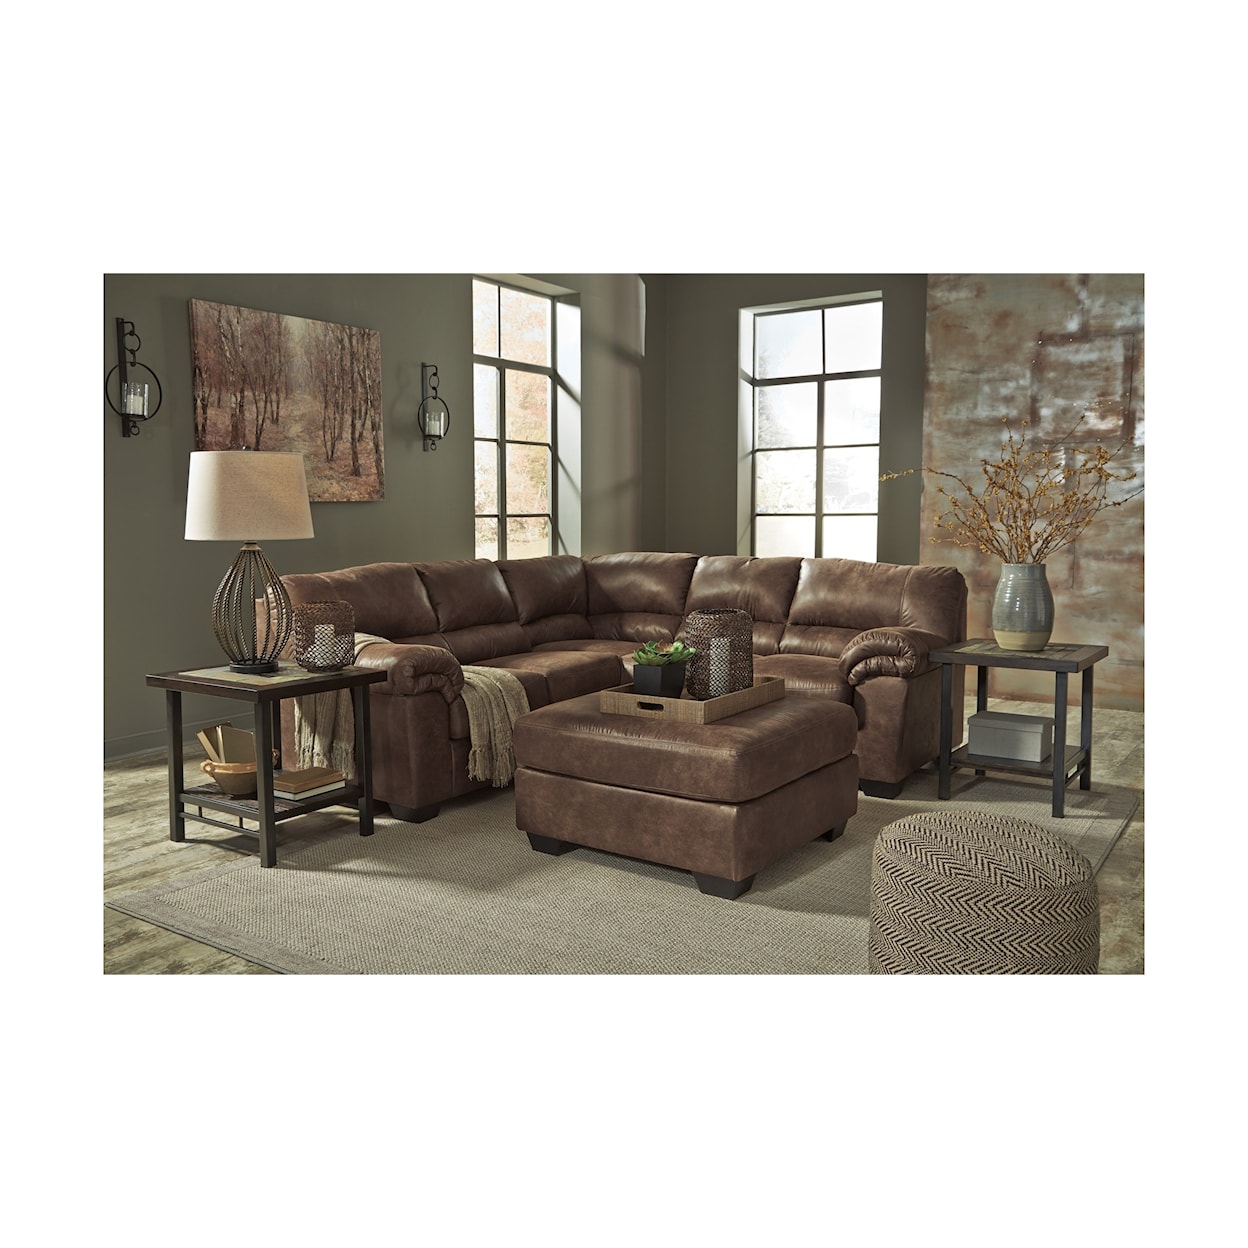 Benchcraft Bladen 2-Piece Sectional with Ottoman